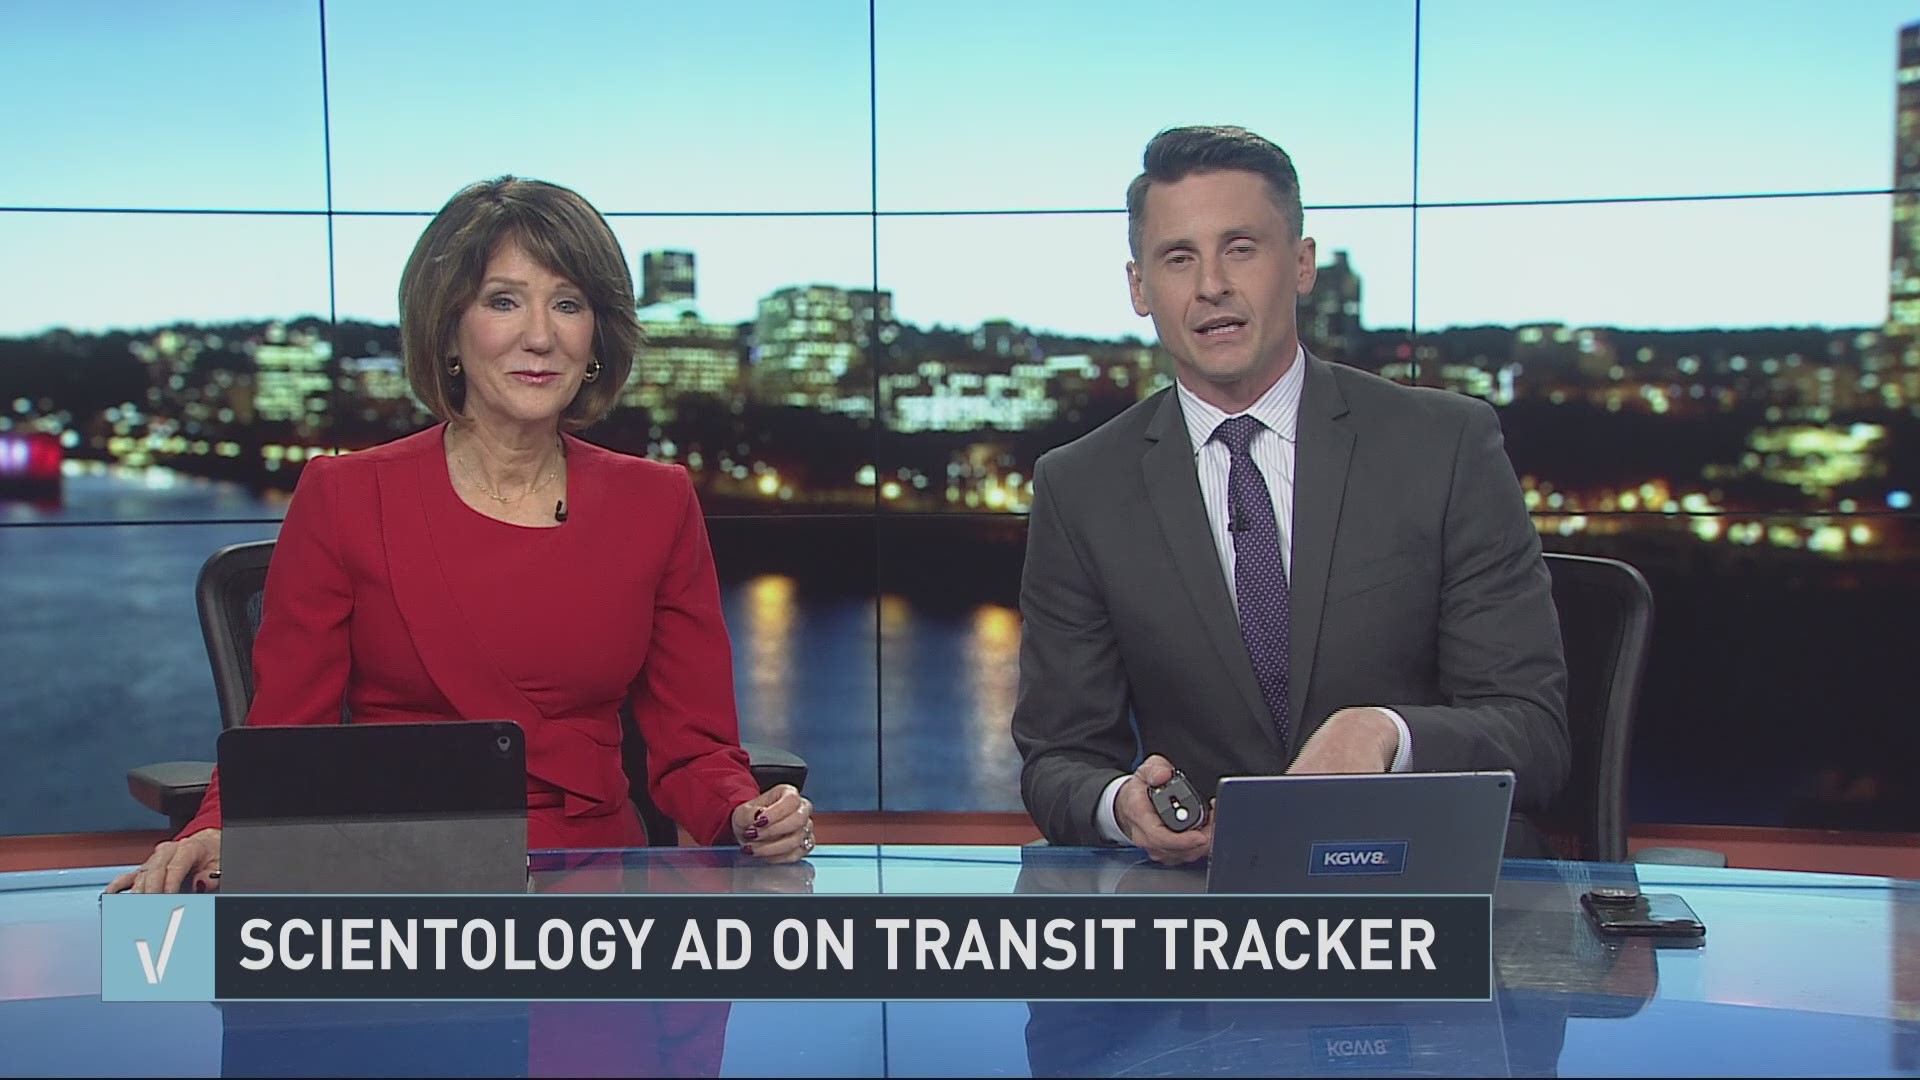 At least one subscriber to TriMet's TransitTracker tool reported receiving a text response including an ad to join Scientology.